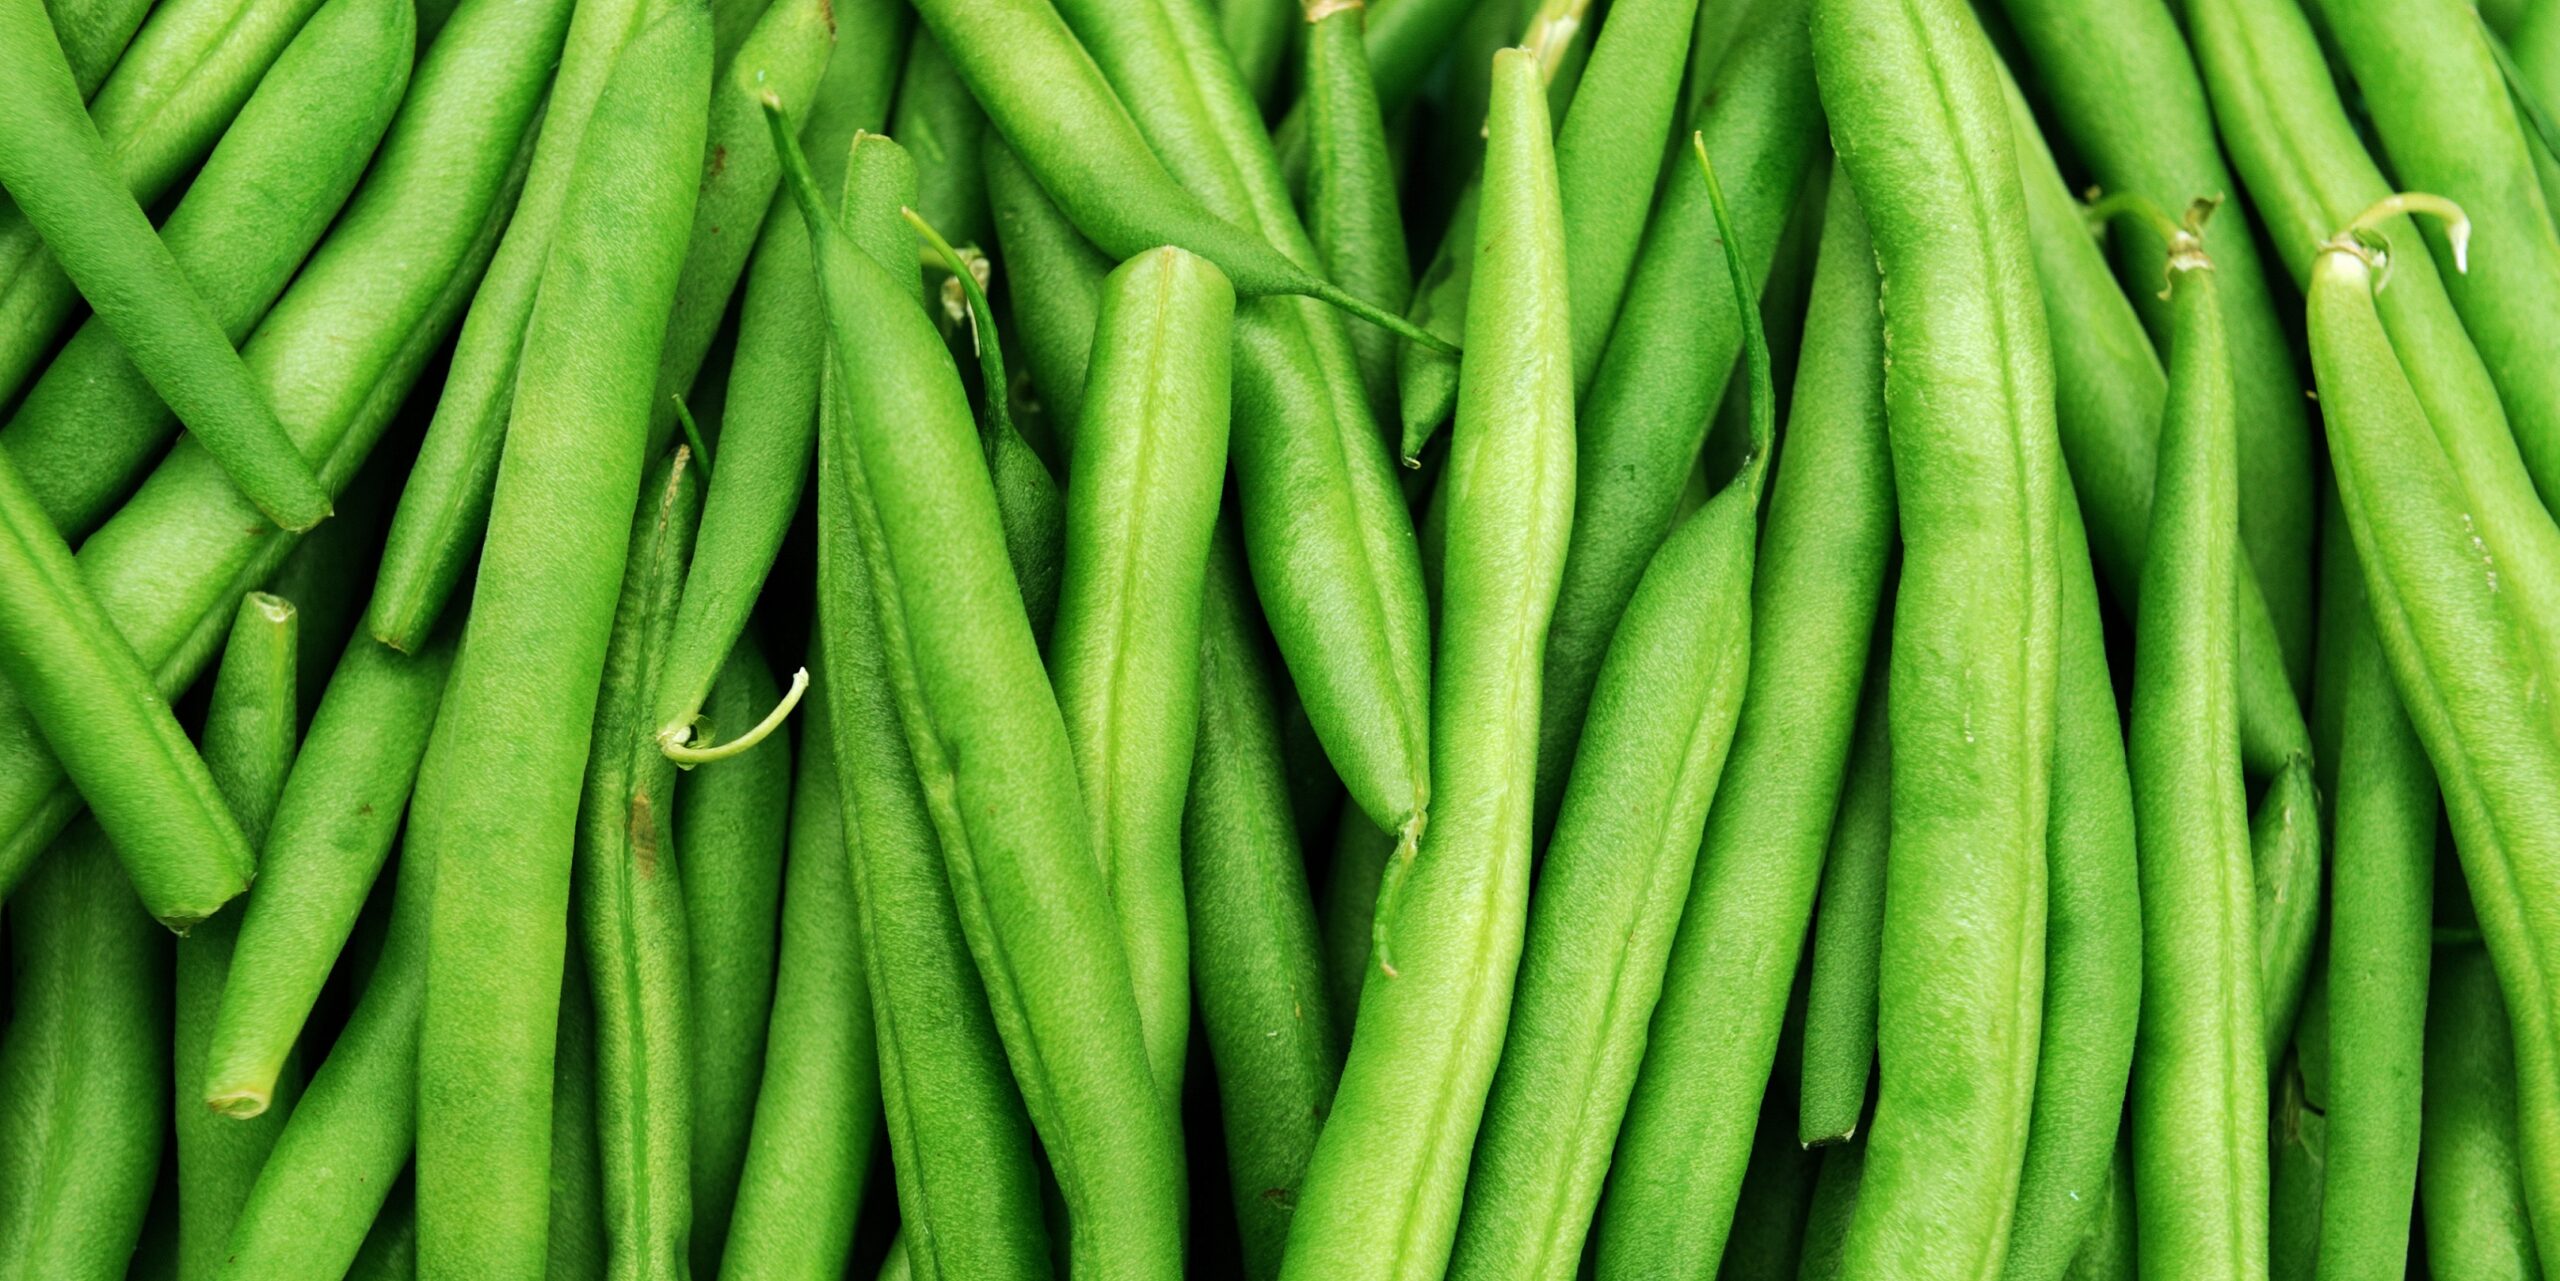 Nutrition: Can beans also be eaten raw?